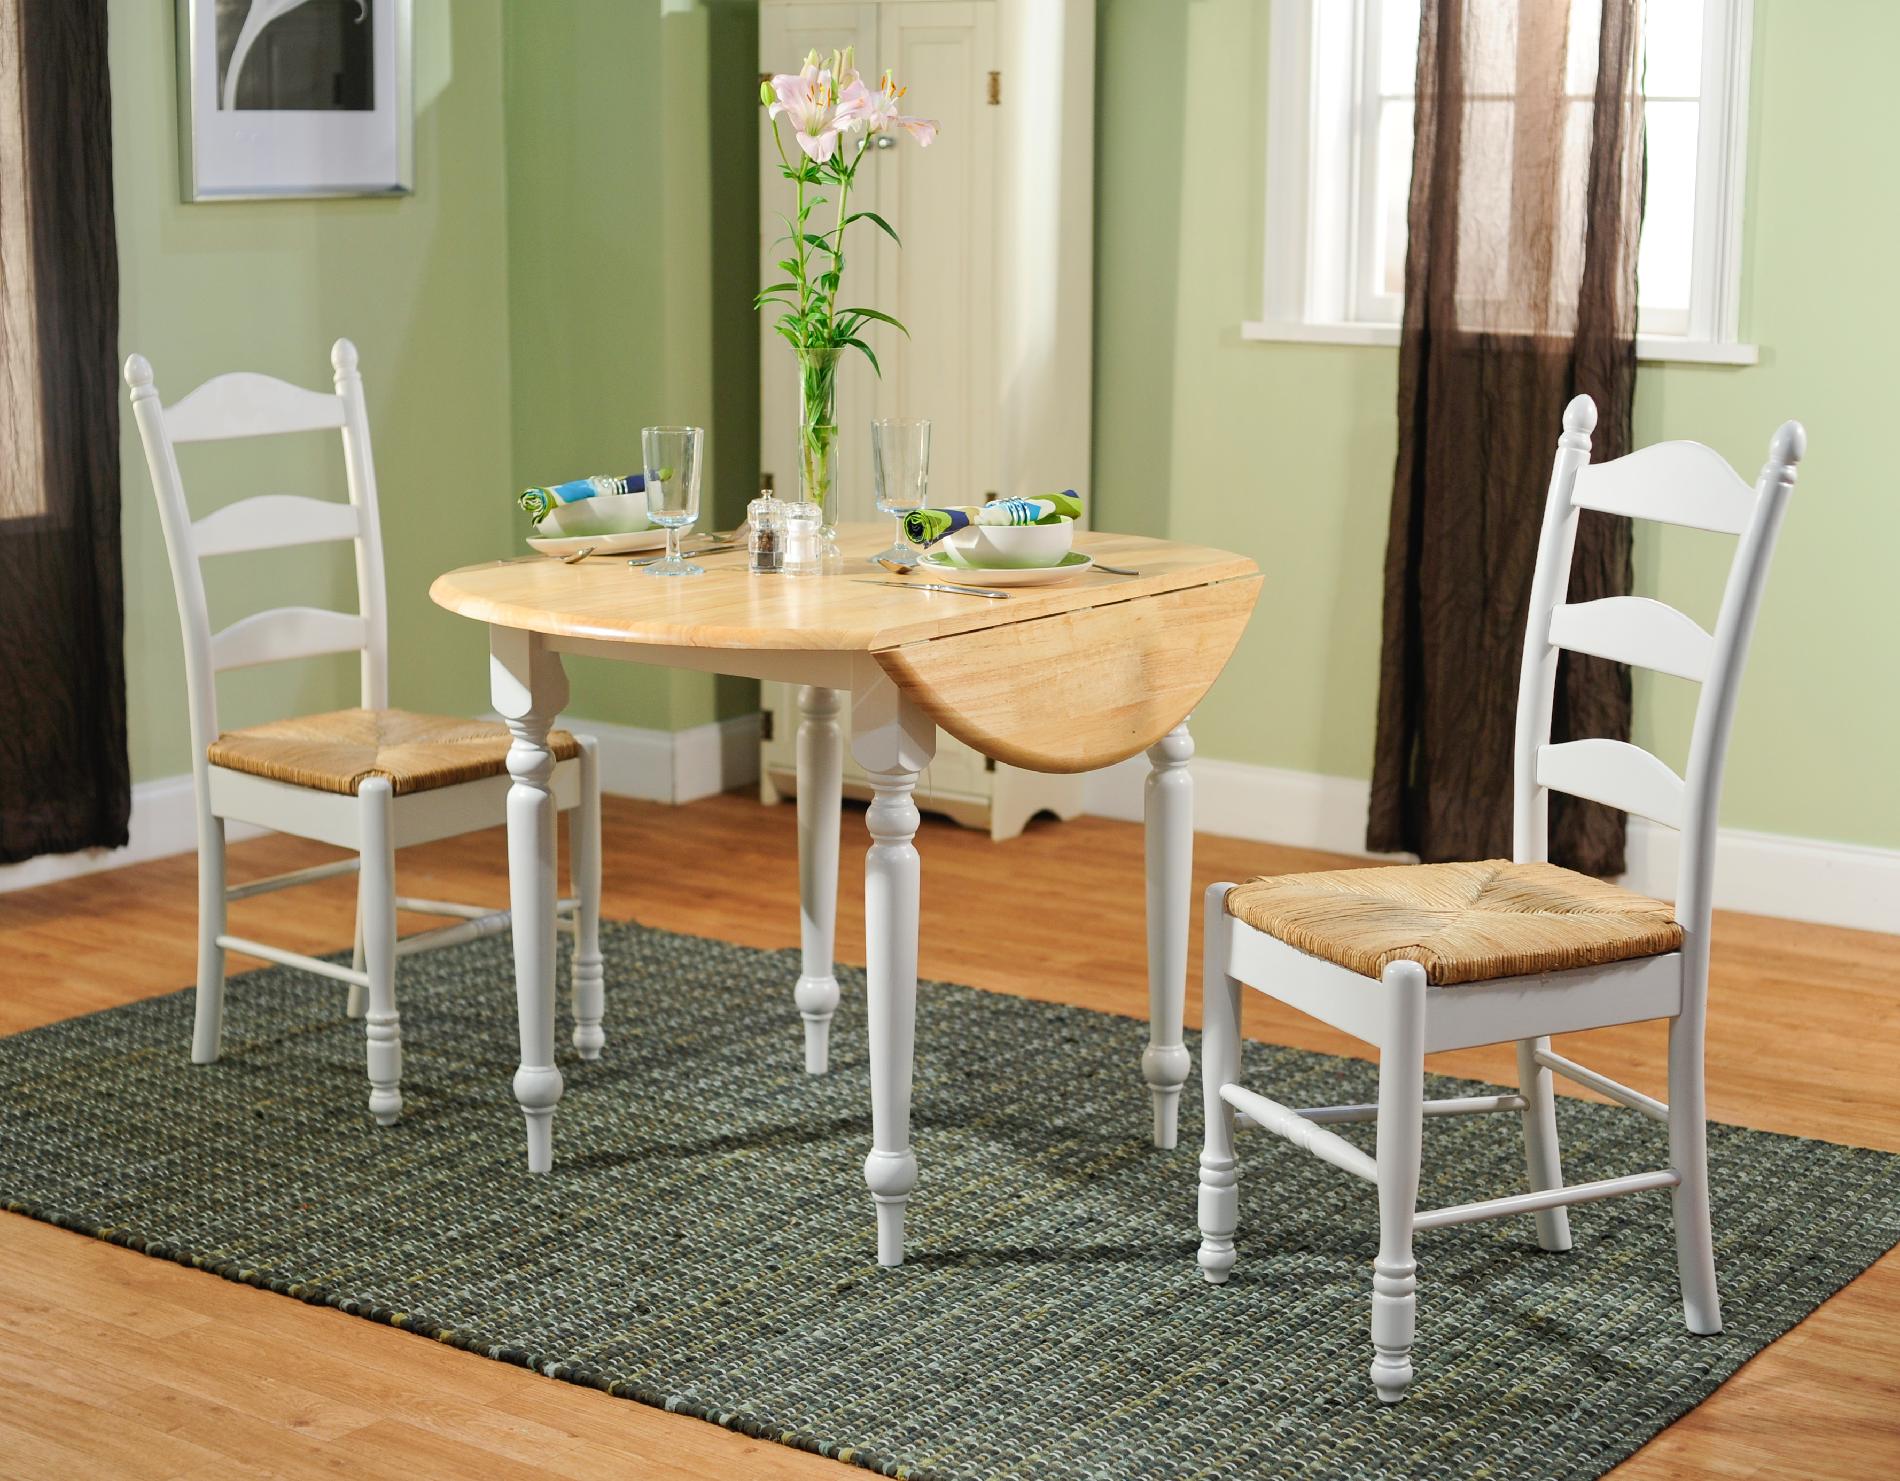 3pc Ladderback dining set in white and natural